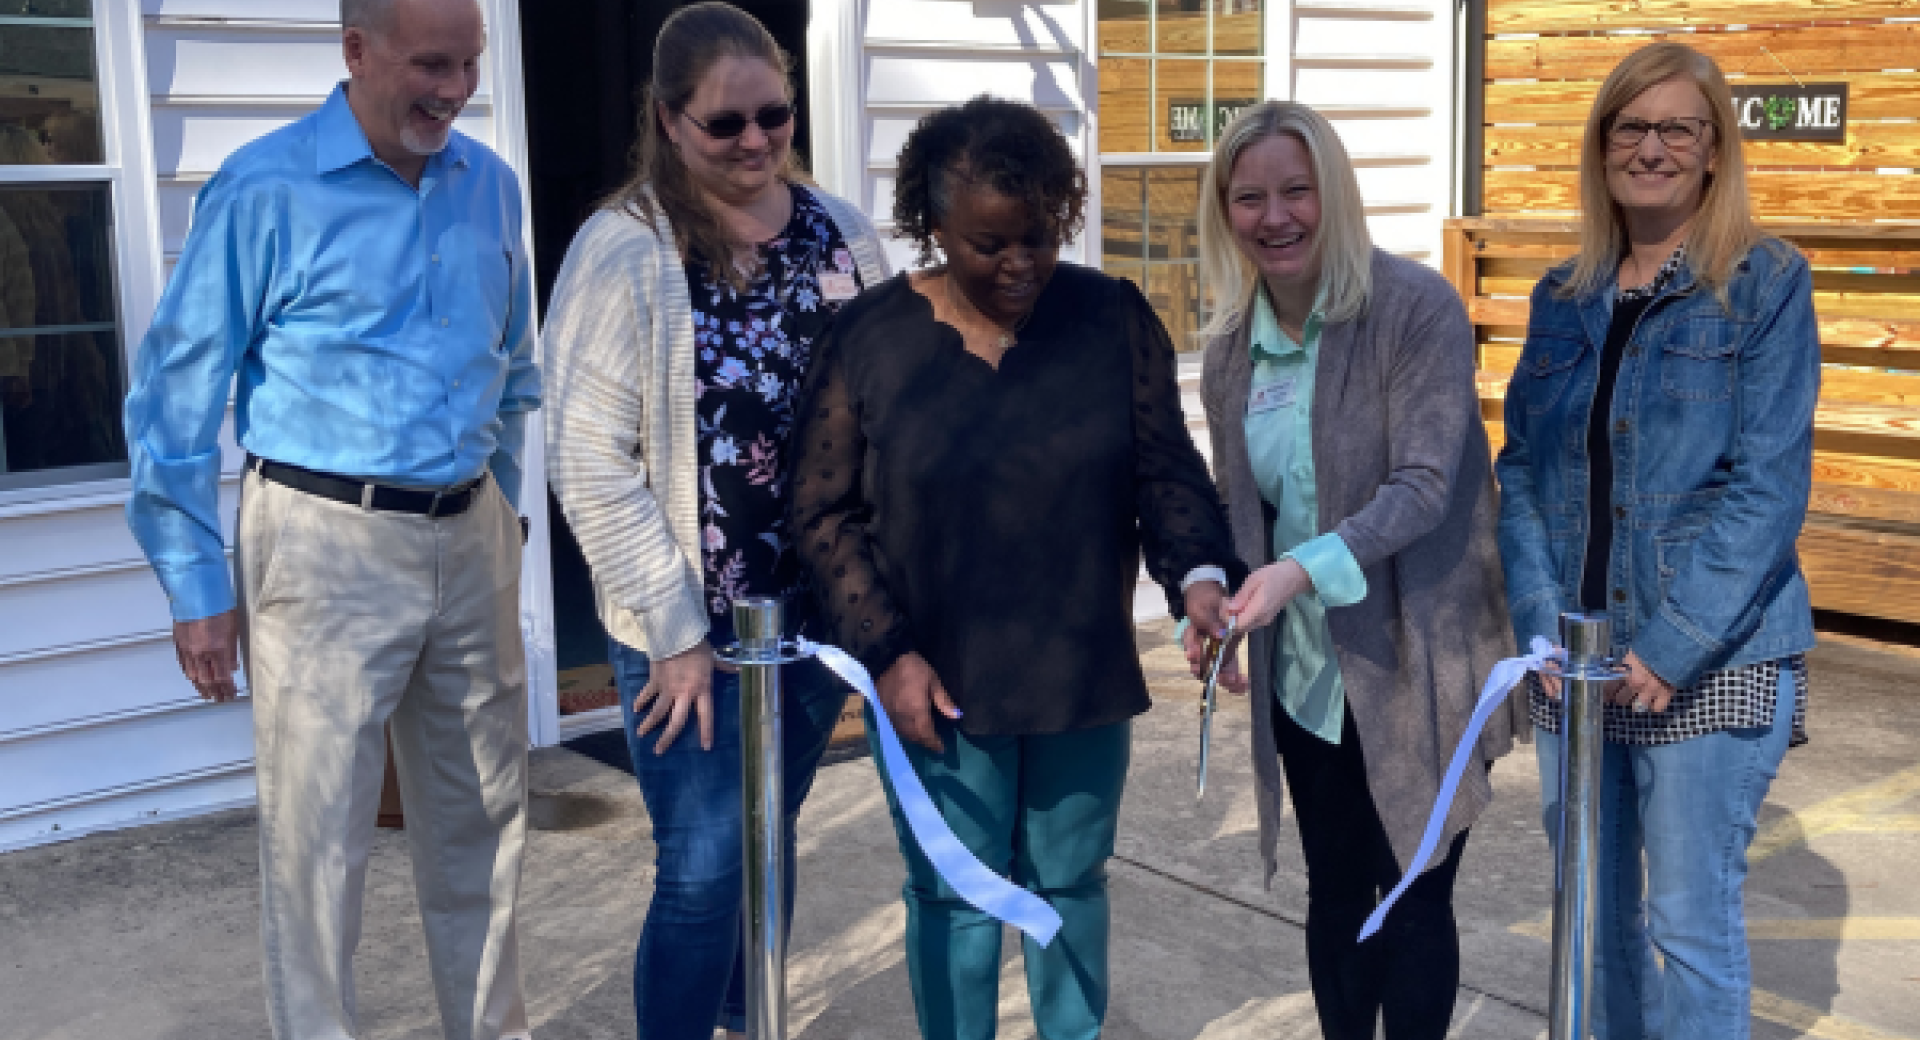 Ribbon cut for new Day Services Program